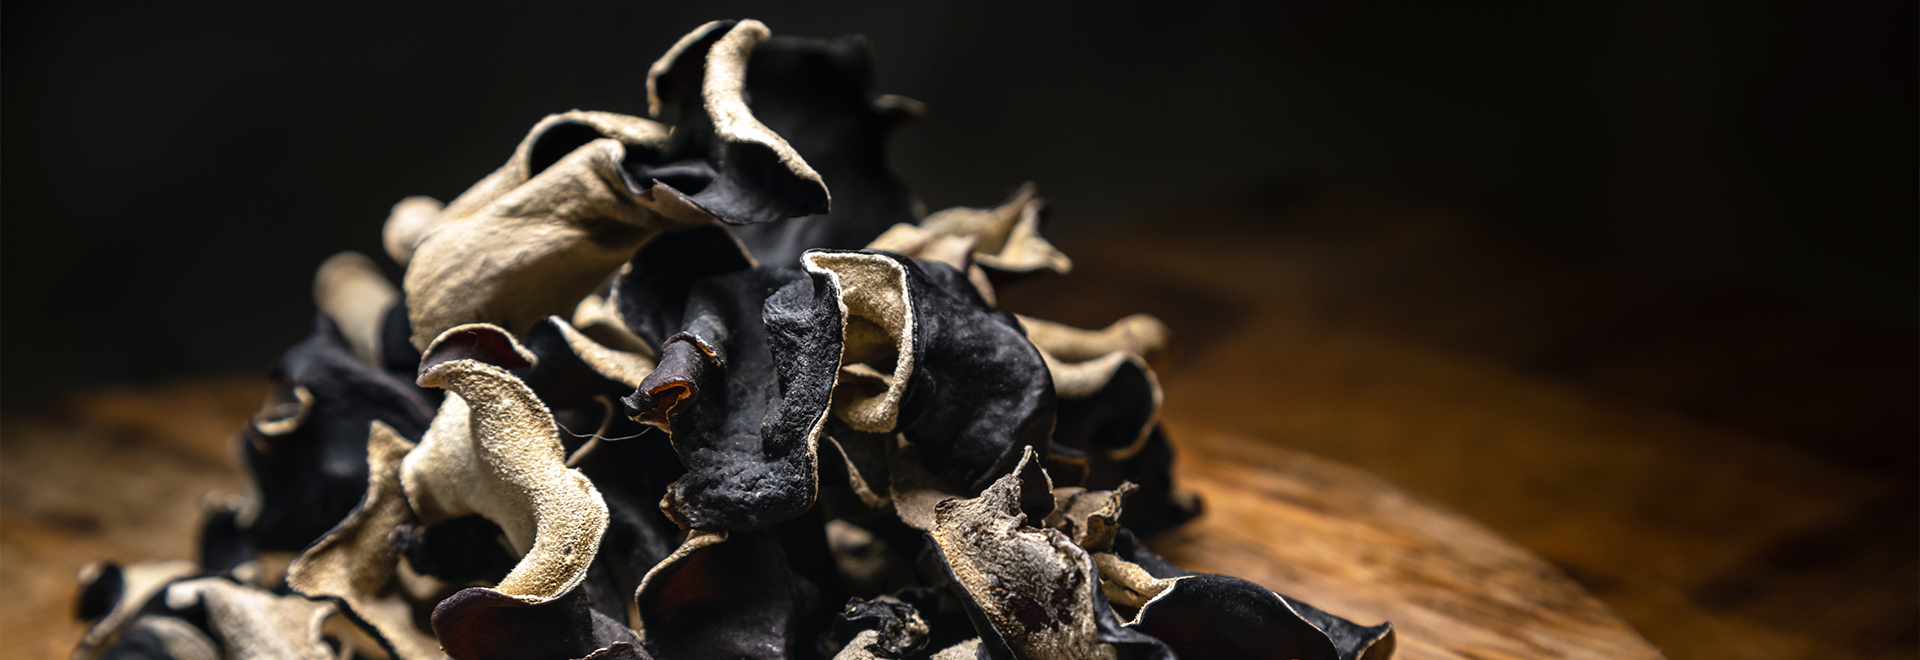 difference-between-cloud-ear-fungus-and-wood-ear-fungus-and-their-benefits